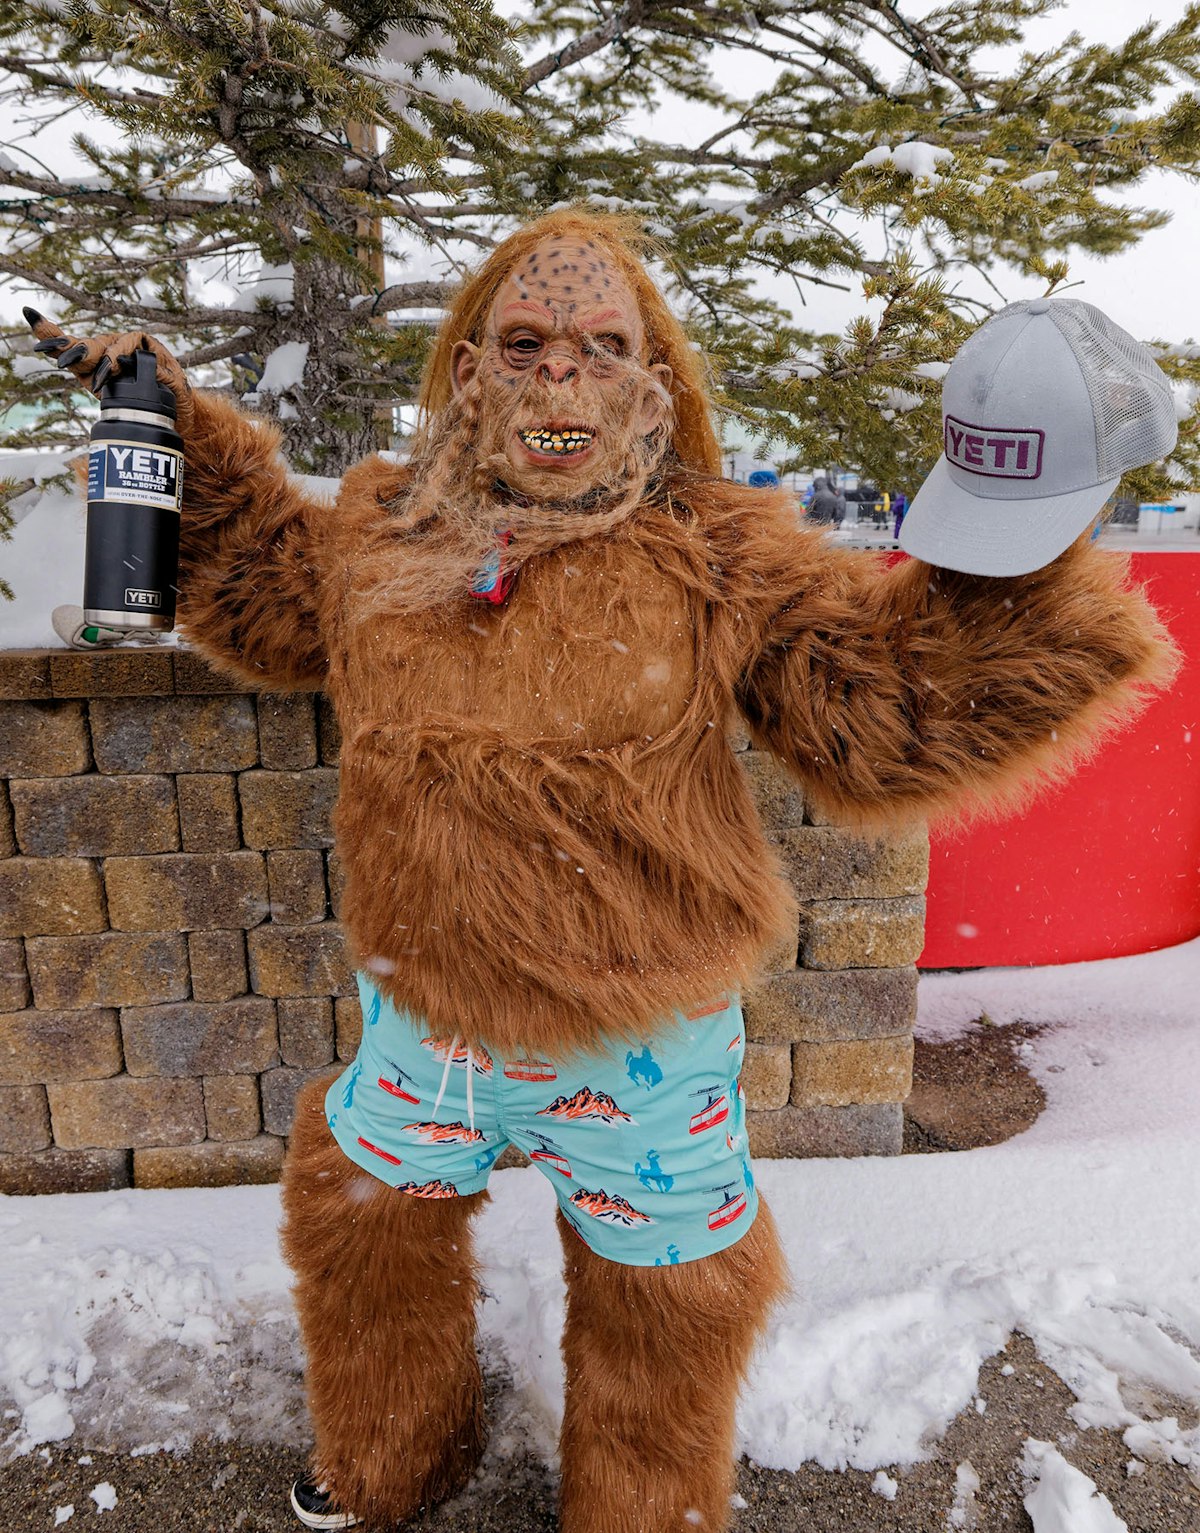 Person in a yeti costume holding a YETI mug and hat